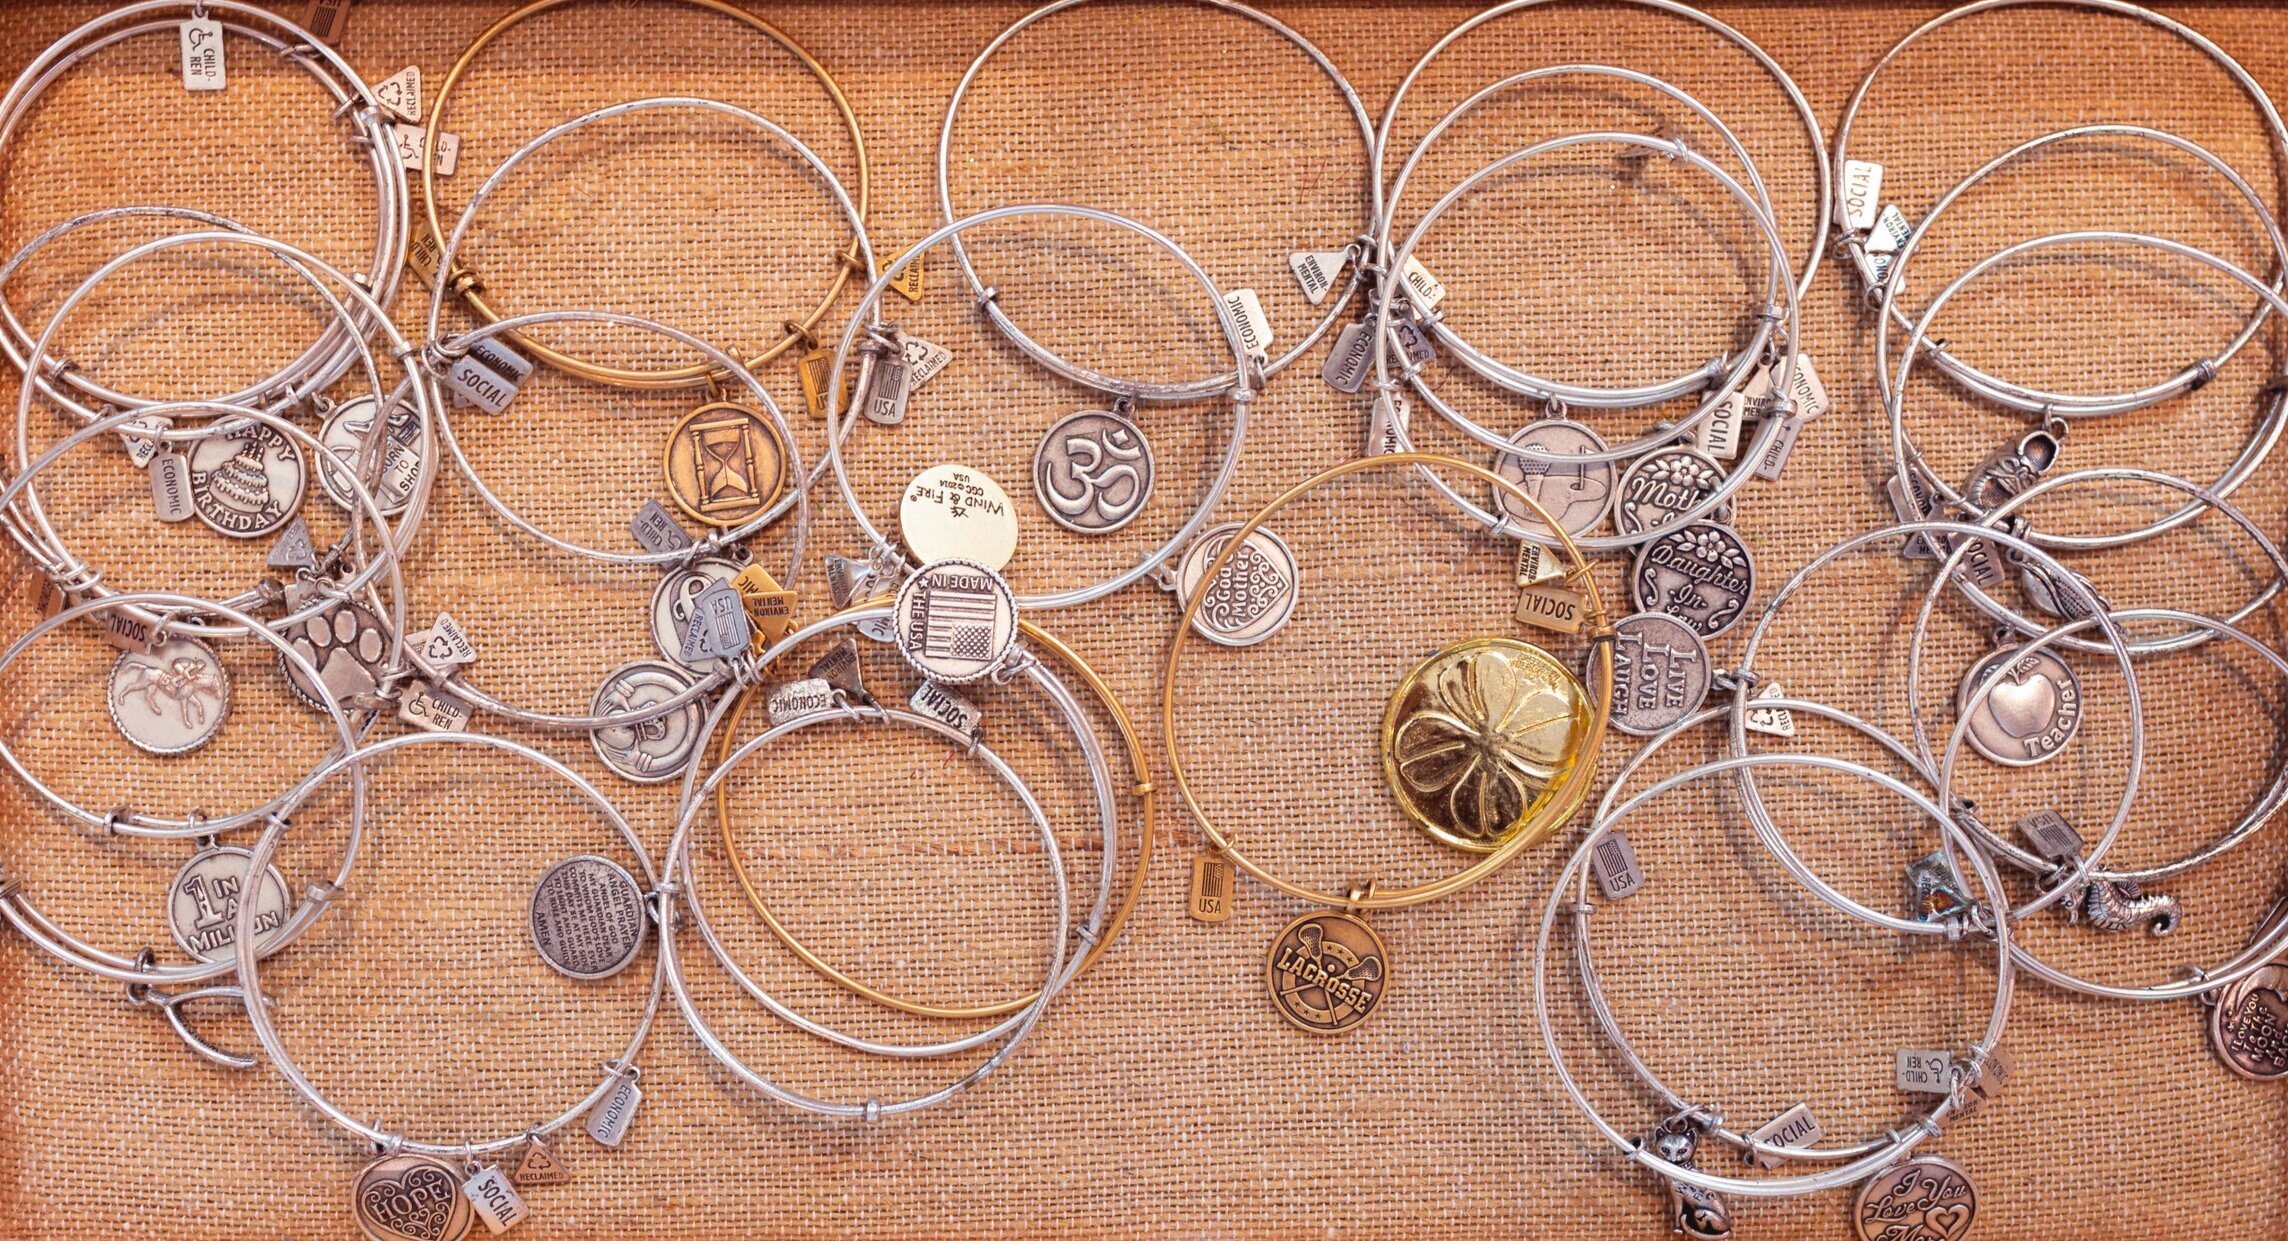 How to Clean Alex and Ani Bracelets